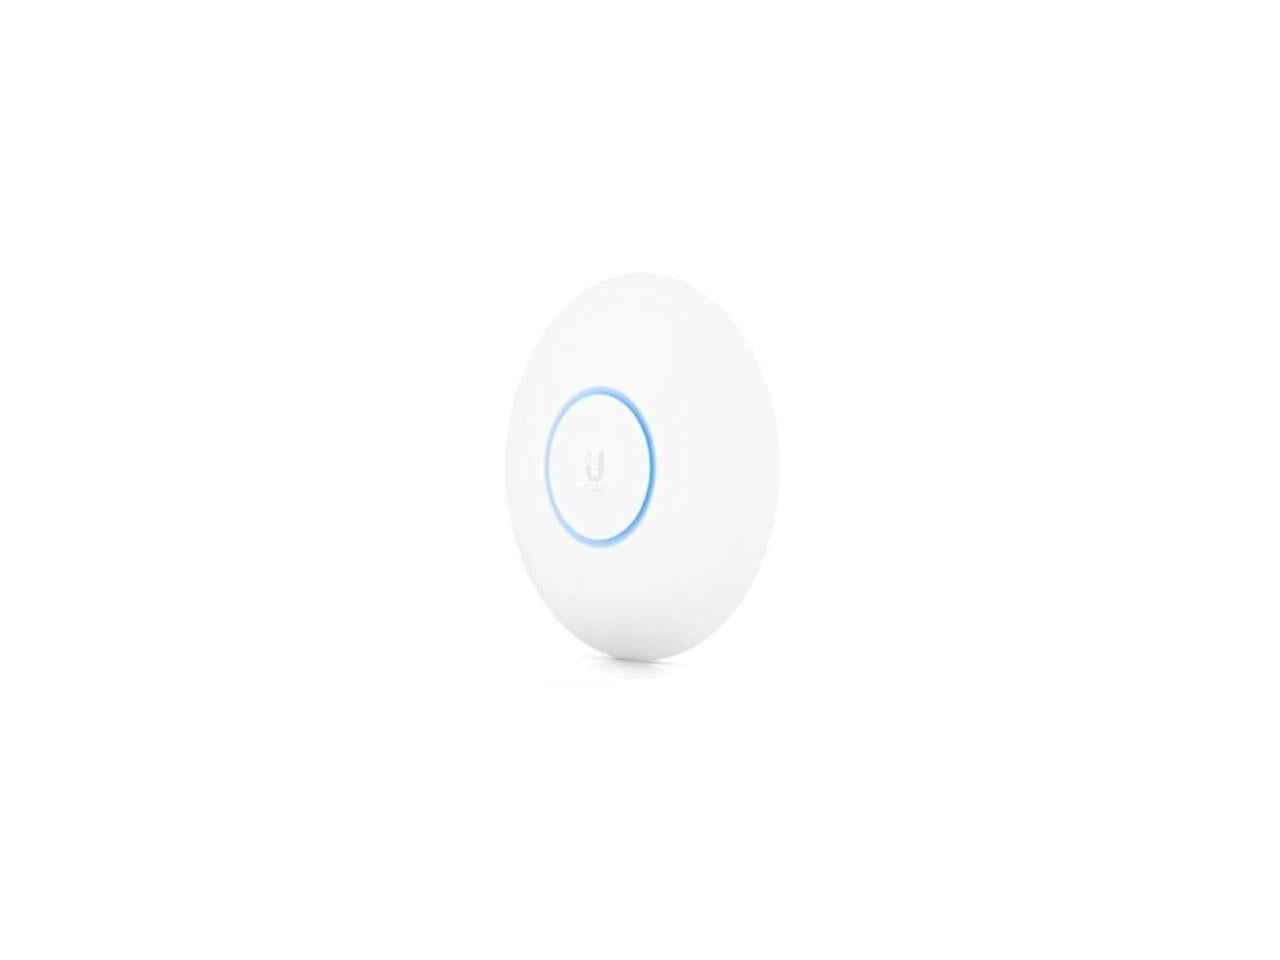 Pro Dual Access White | Mbps Gen 300 SGCC Throughput | Point 6 2.4 Professional Client Indoor Rate | Gbps, Band Band WiFi 573.5 Up U6 | Steel Ubiquiti to Band 5GHz WiFi Plastic, | 4.8 UniFi GHz |